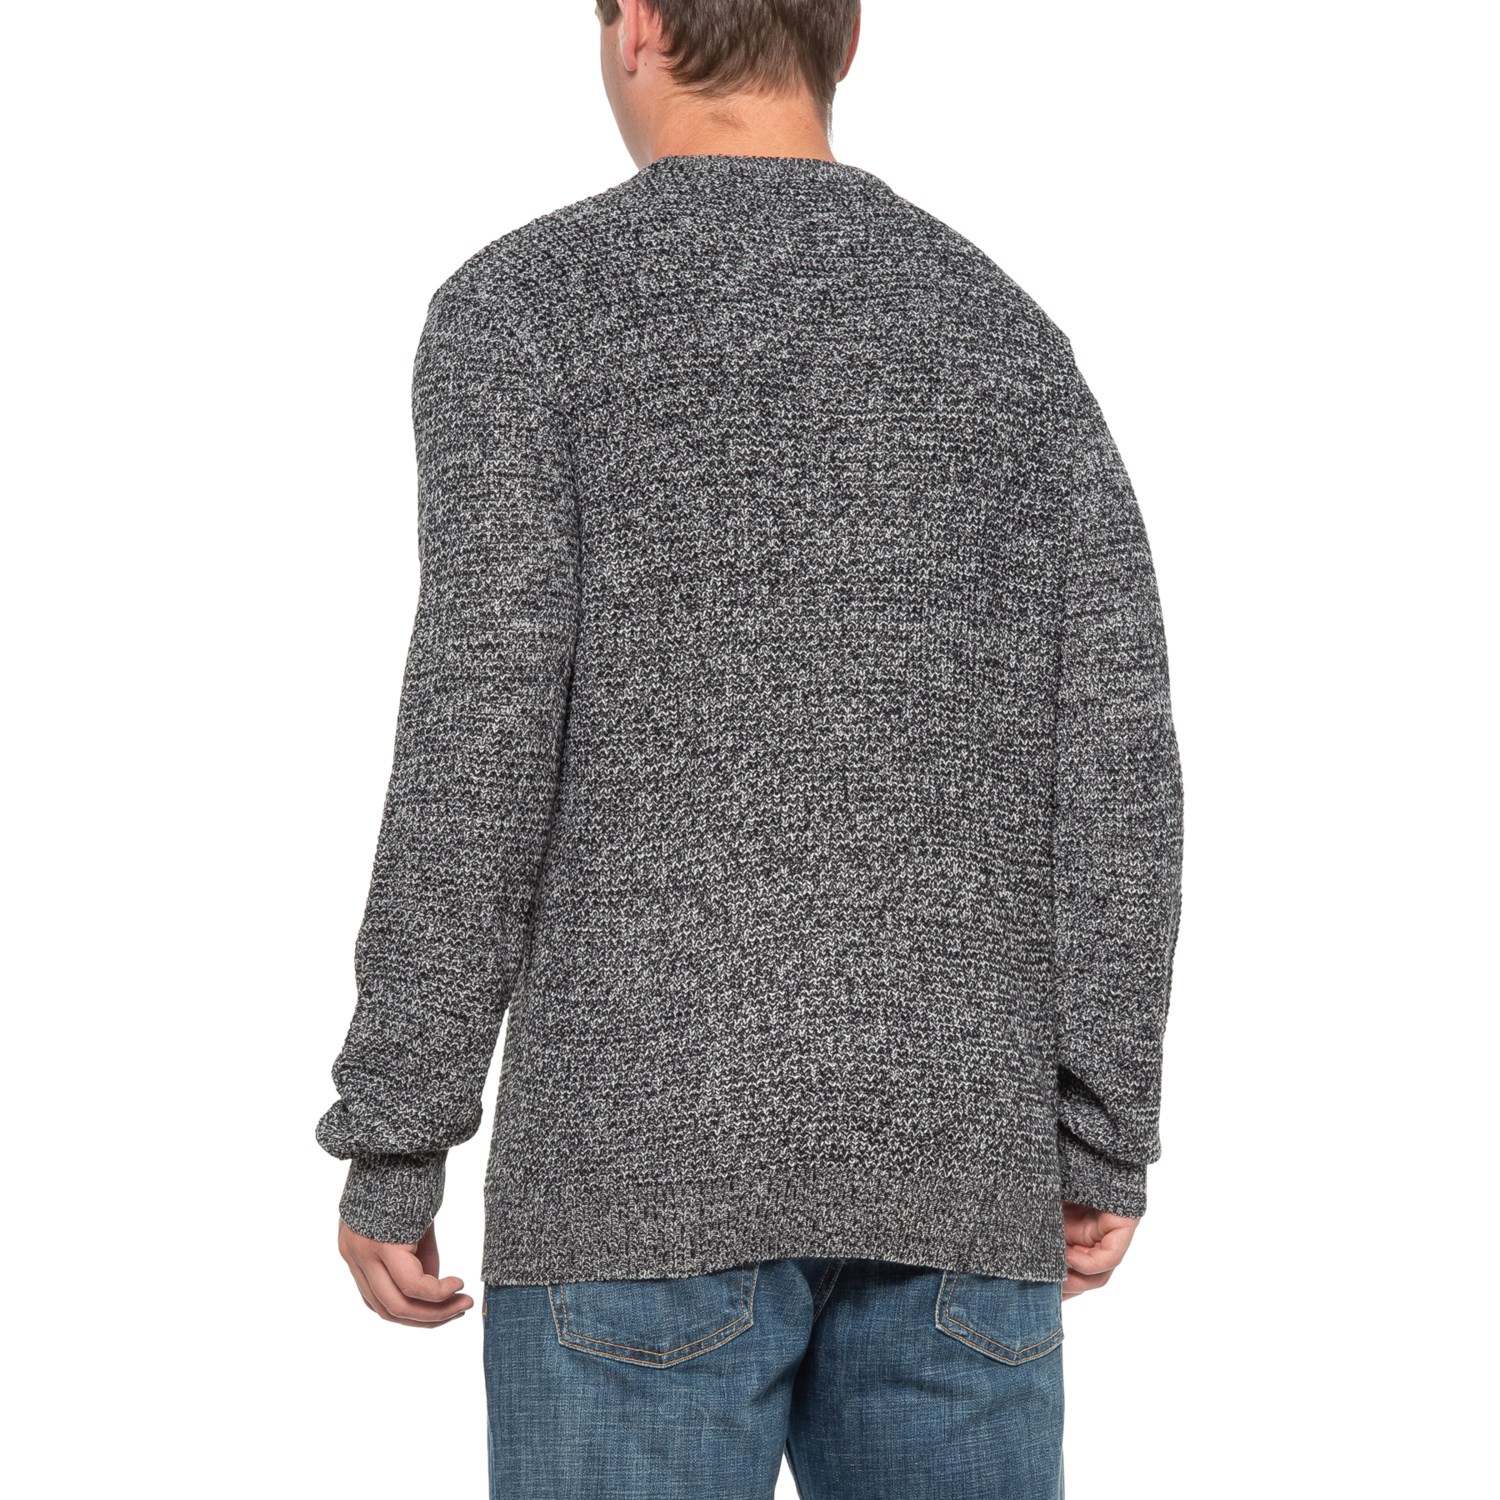 Specially made Solid Honeycomb Stitch-Knit Sweater (For Men) - Save 59%